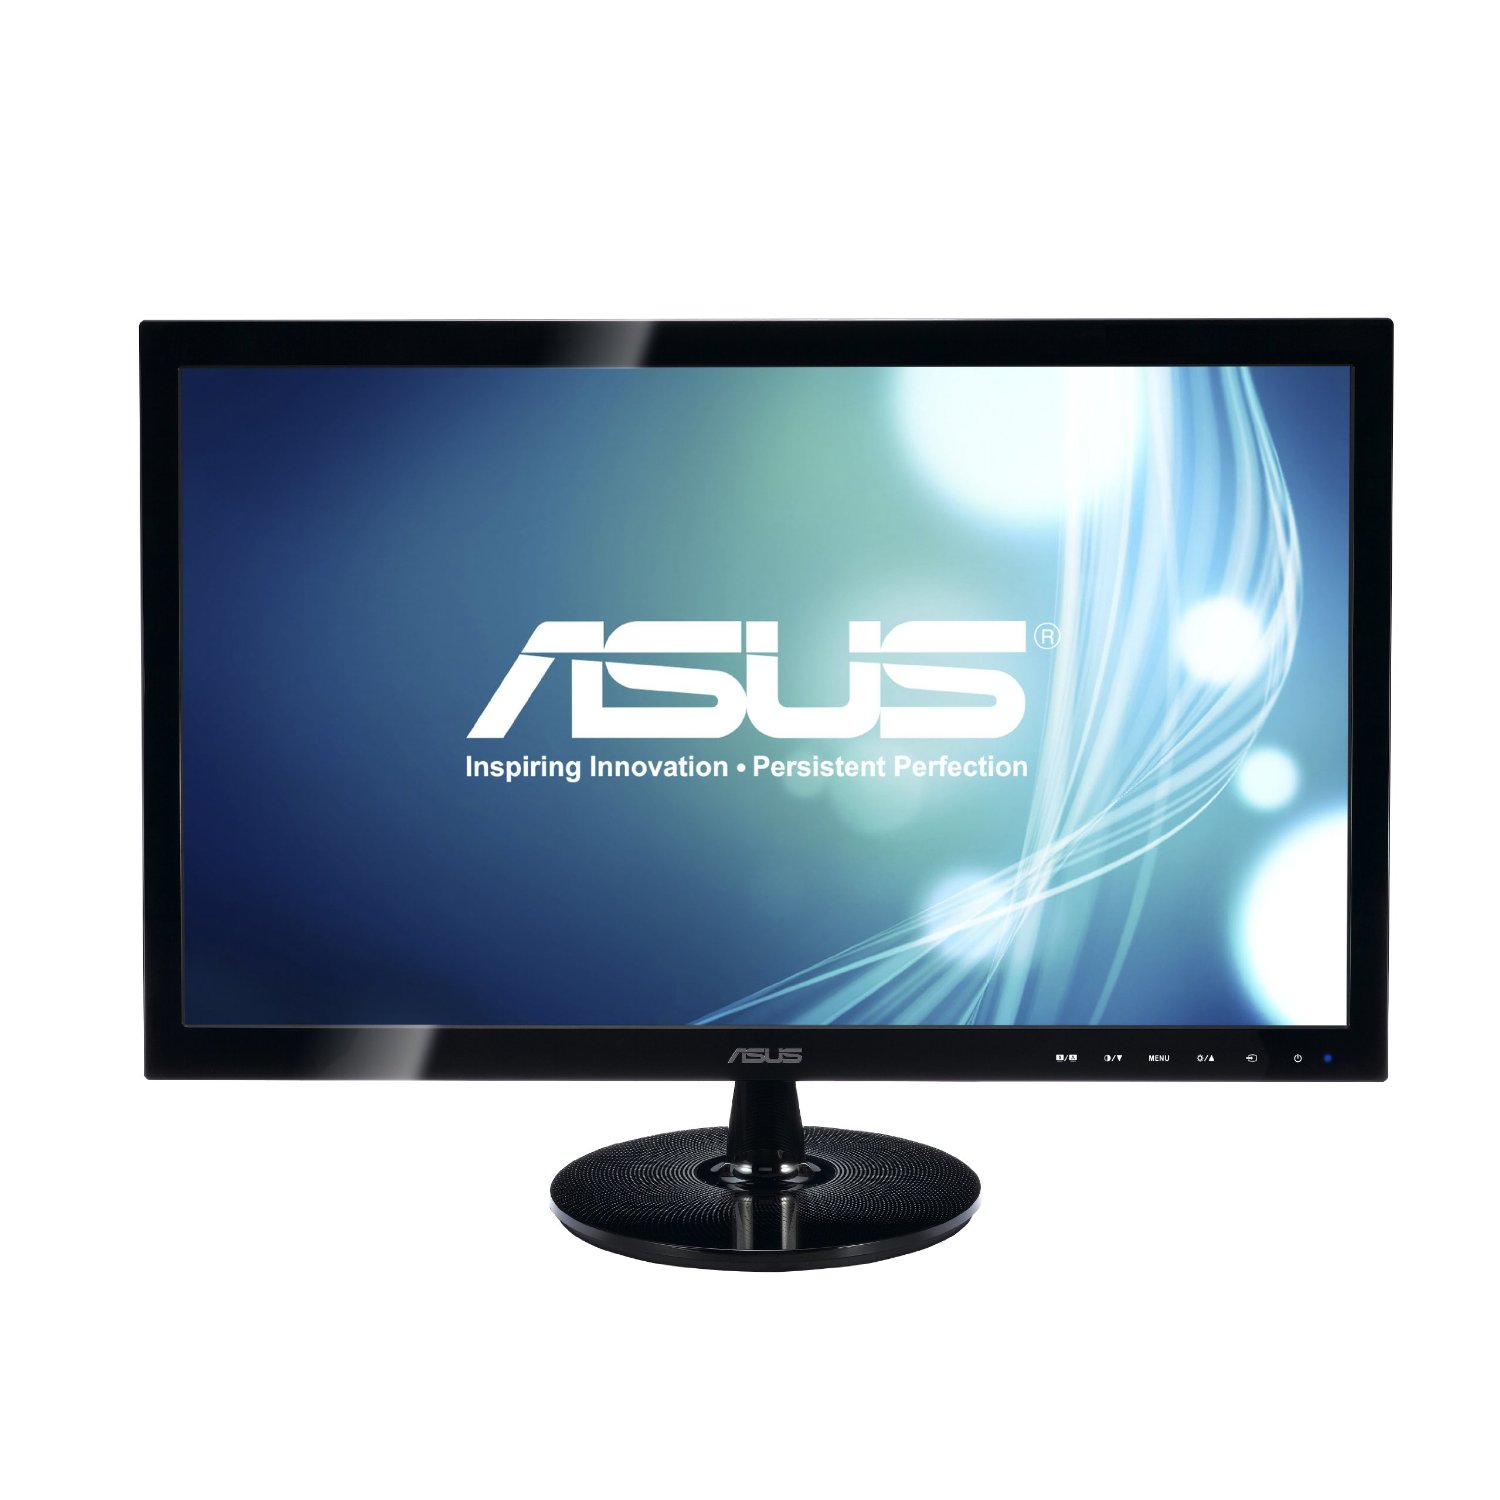 http://thetechjournal.com/wp-content/uploads/images/1206/1340551232-asus-vs248hp-24inch-fullhd-led-monitor-1.jpg